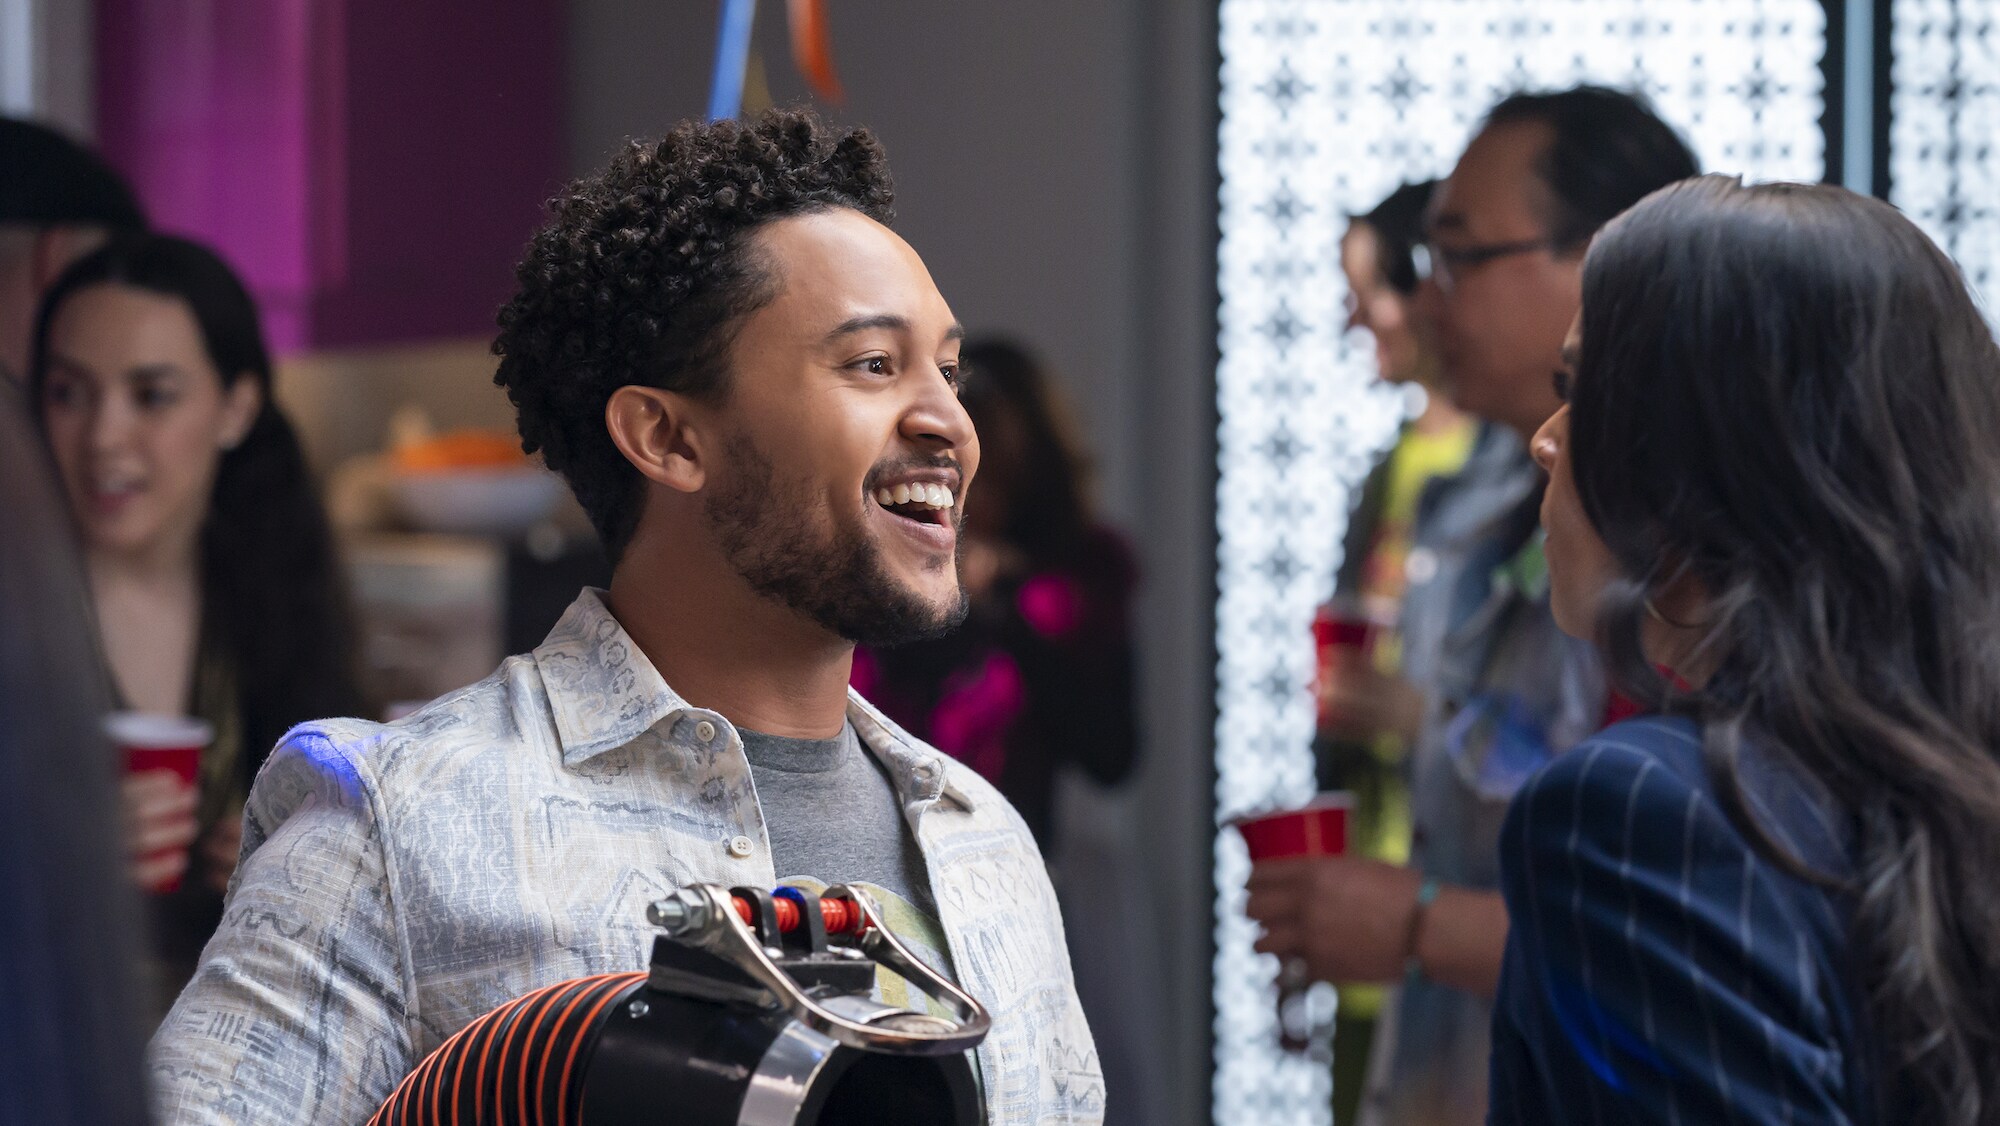 THE MUPPETS MAYHEM -  “Track 1: Can You Picture That?” (Disney/Mitch Haaseth) TAHJ MOWRY